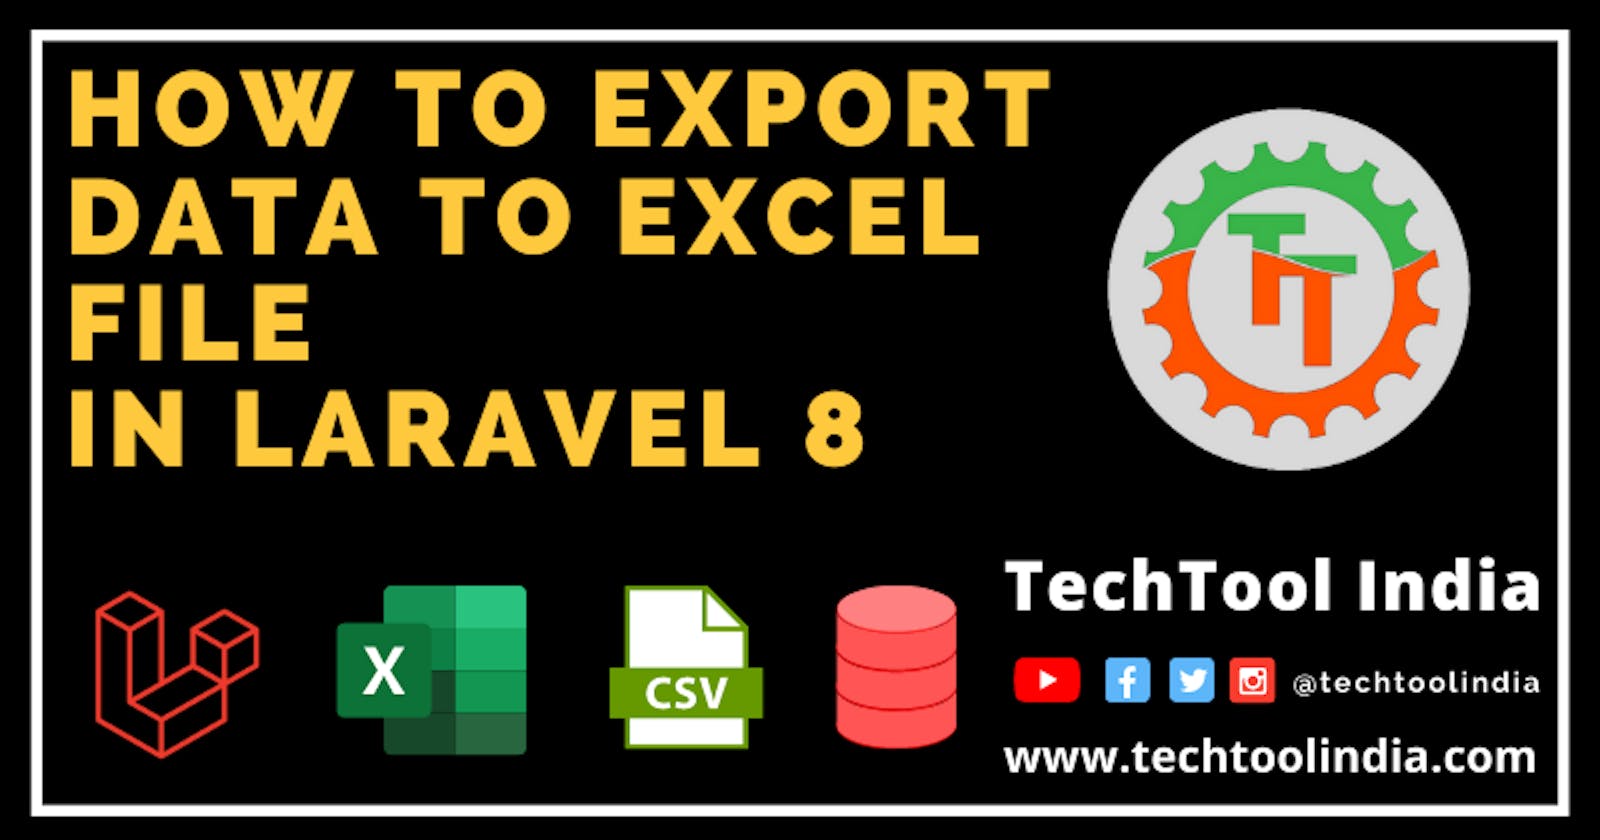 How to export data to excel in Laravel 8